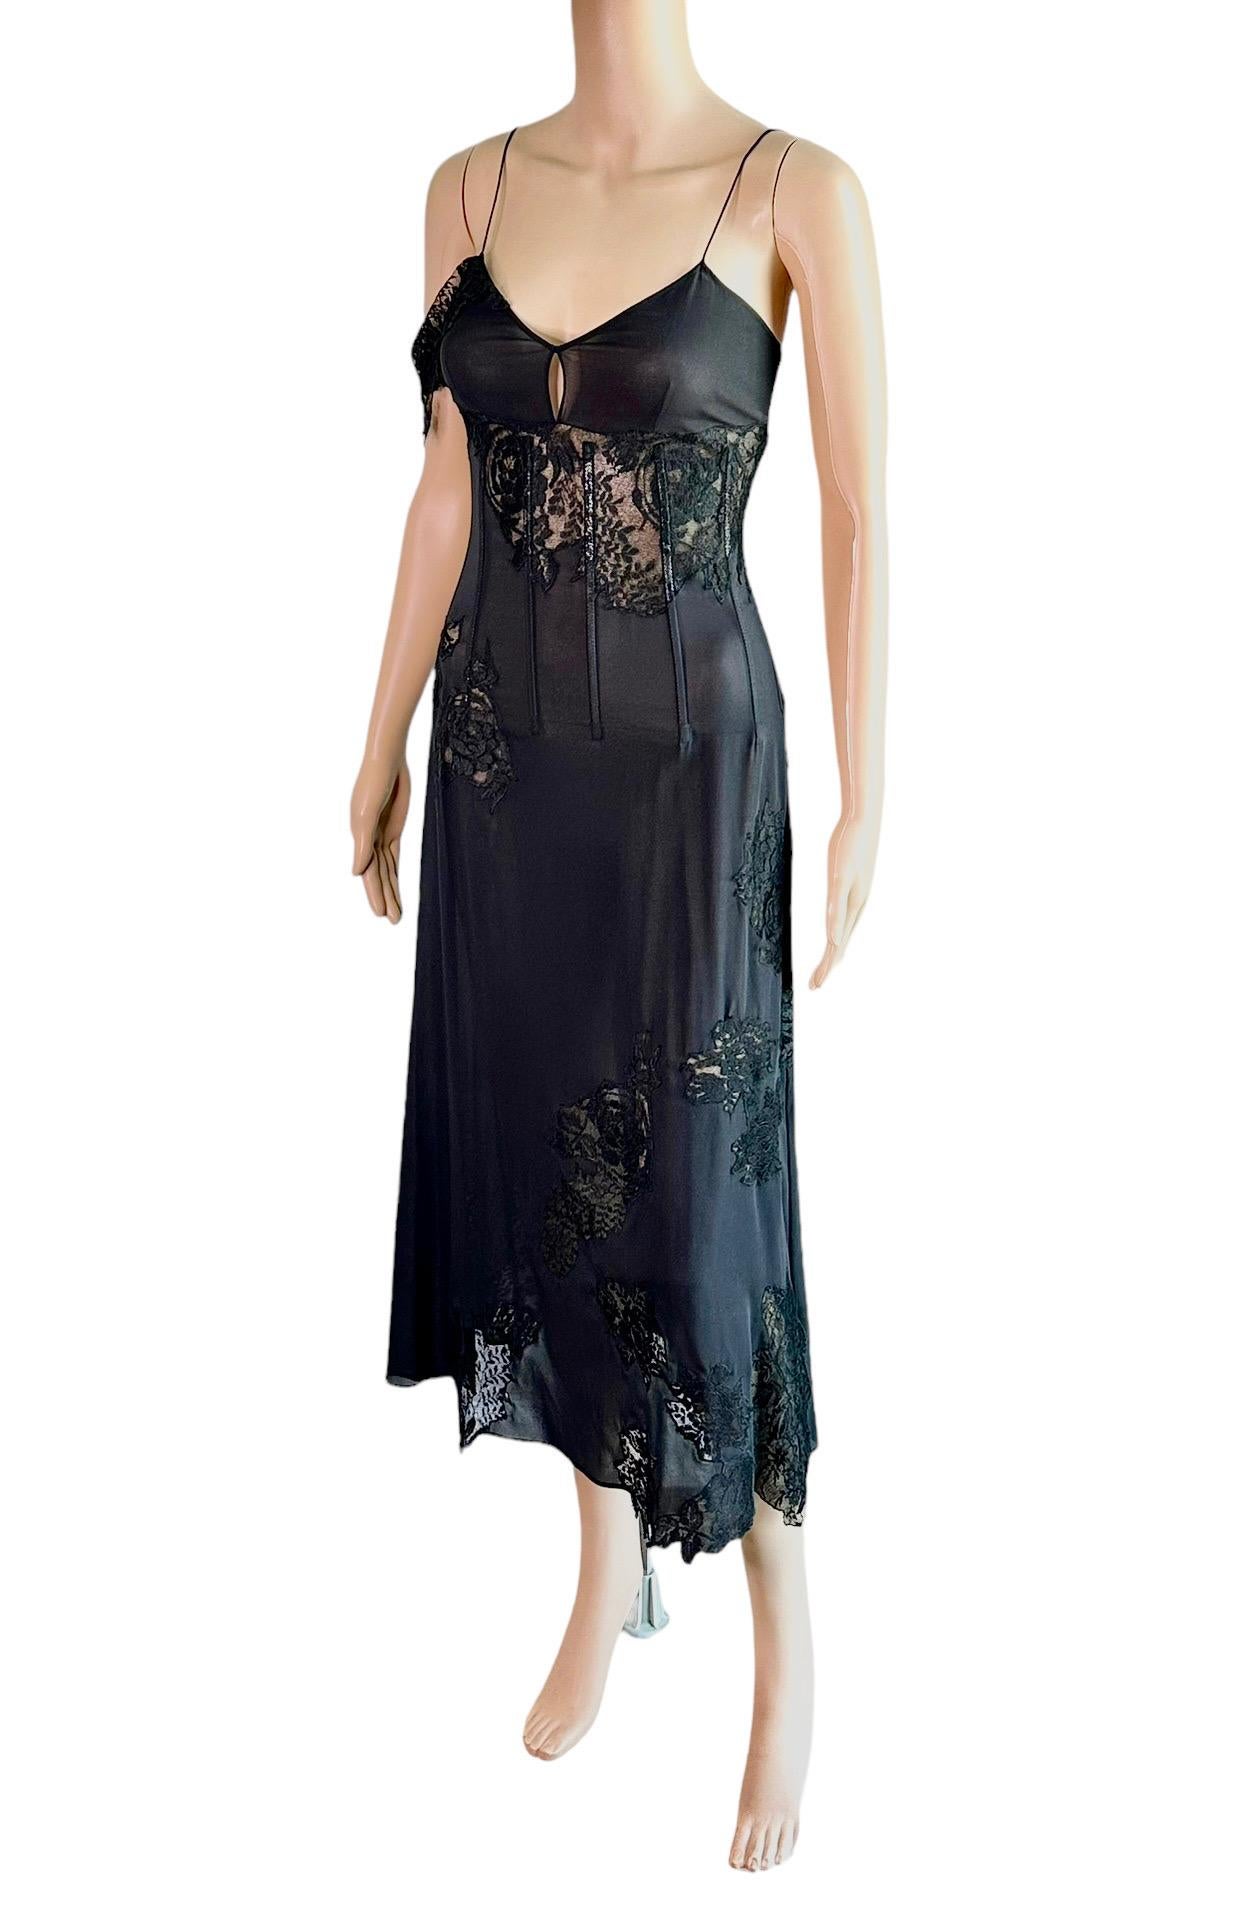 Dolce & Gabbana S/S 2002 Runway Unworn Sheer Lace Corset Black Midi Dress IT 42

Look 4 from the Spring 2002 Collection.

FOLLOW US ON INSTAGRAM @OPULENTADDICT